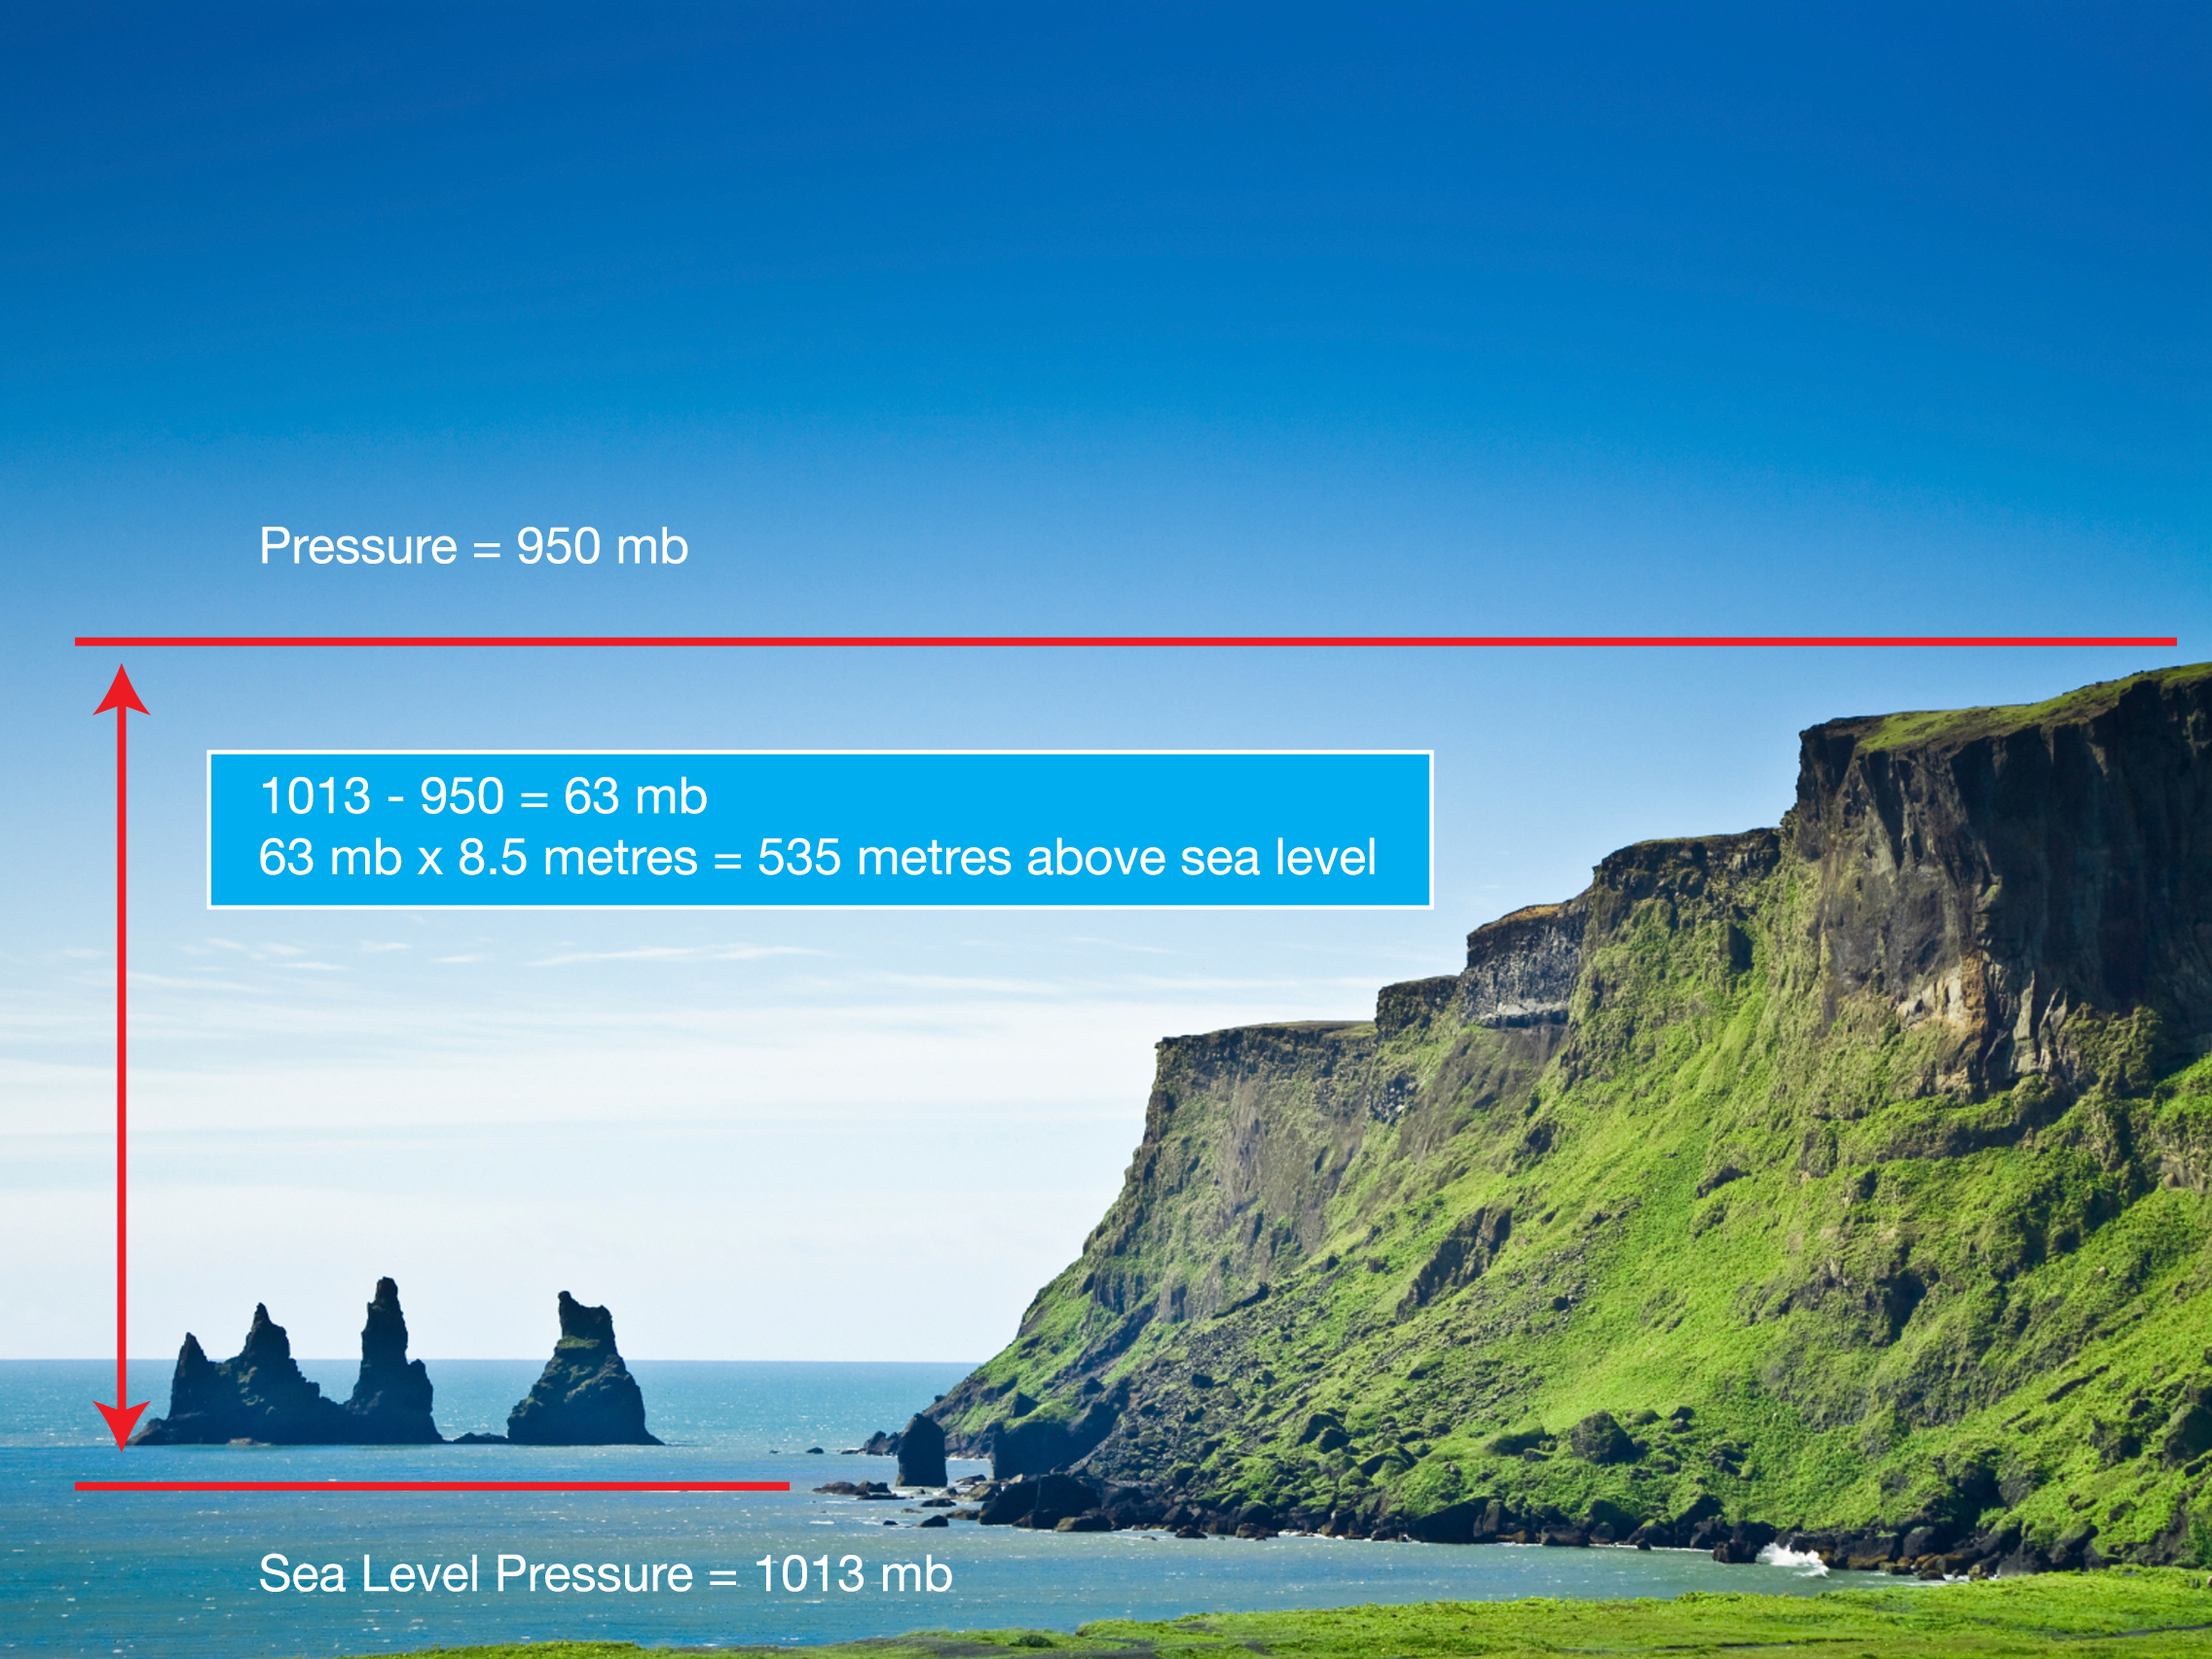 Hybrid picture, image of a coastline with a diagram demonstrating Barometric pressure overlaid on top of it.